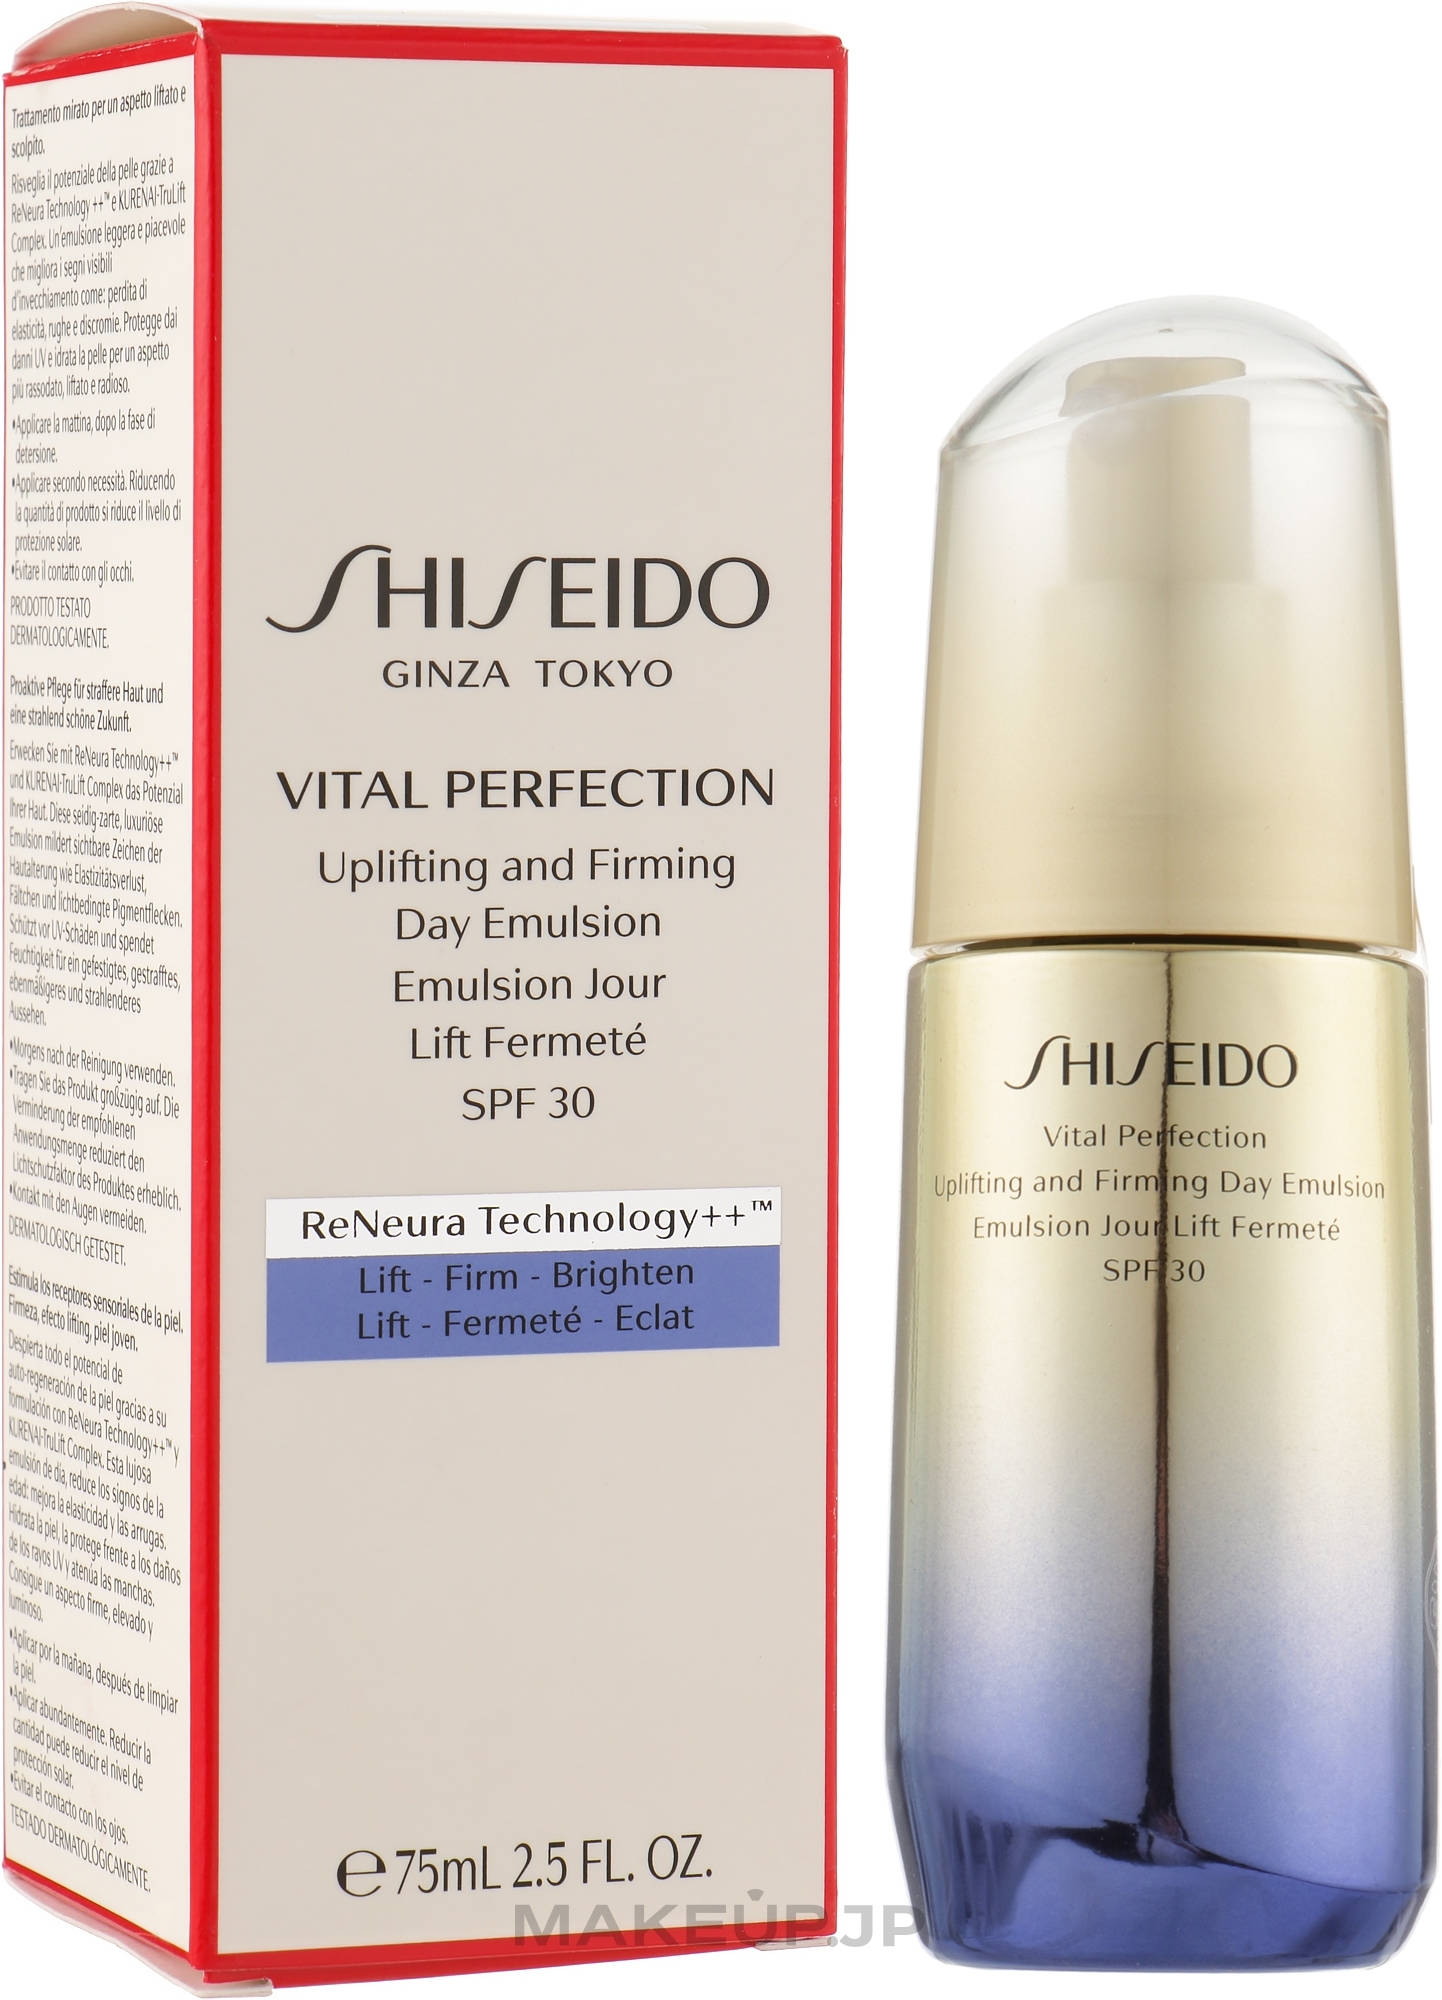 Anti-Aging Day Emulsion SPF30 - Shiseido Vital Perfection Uplifting and Firming Day Emulsion SPF30 — photo 75 ml